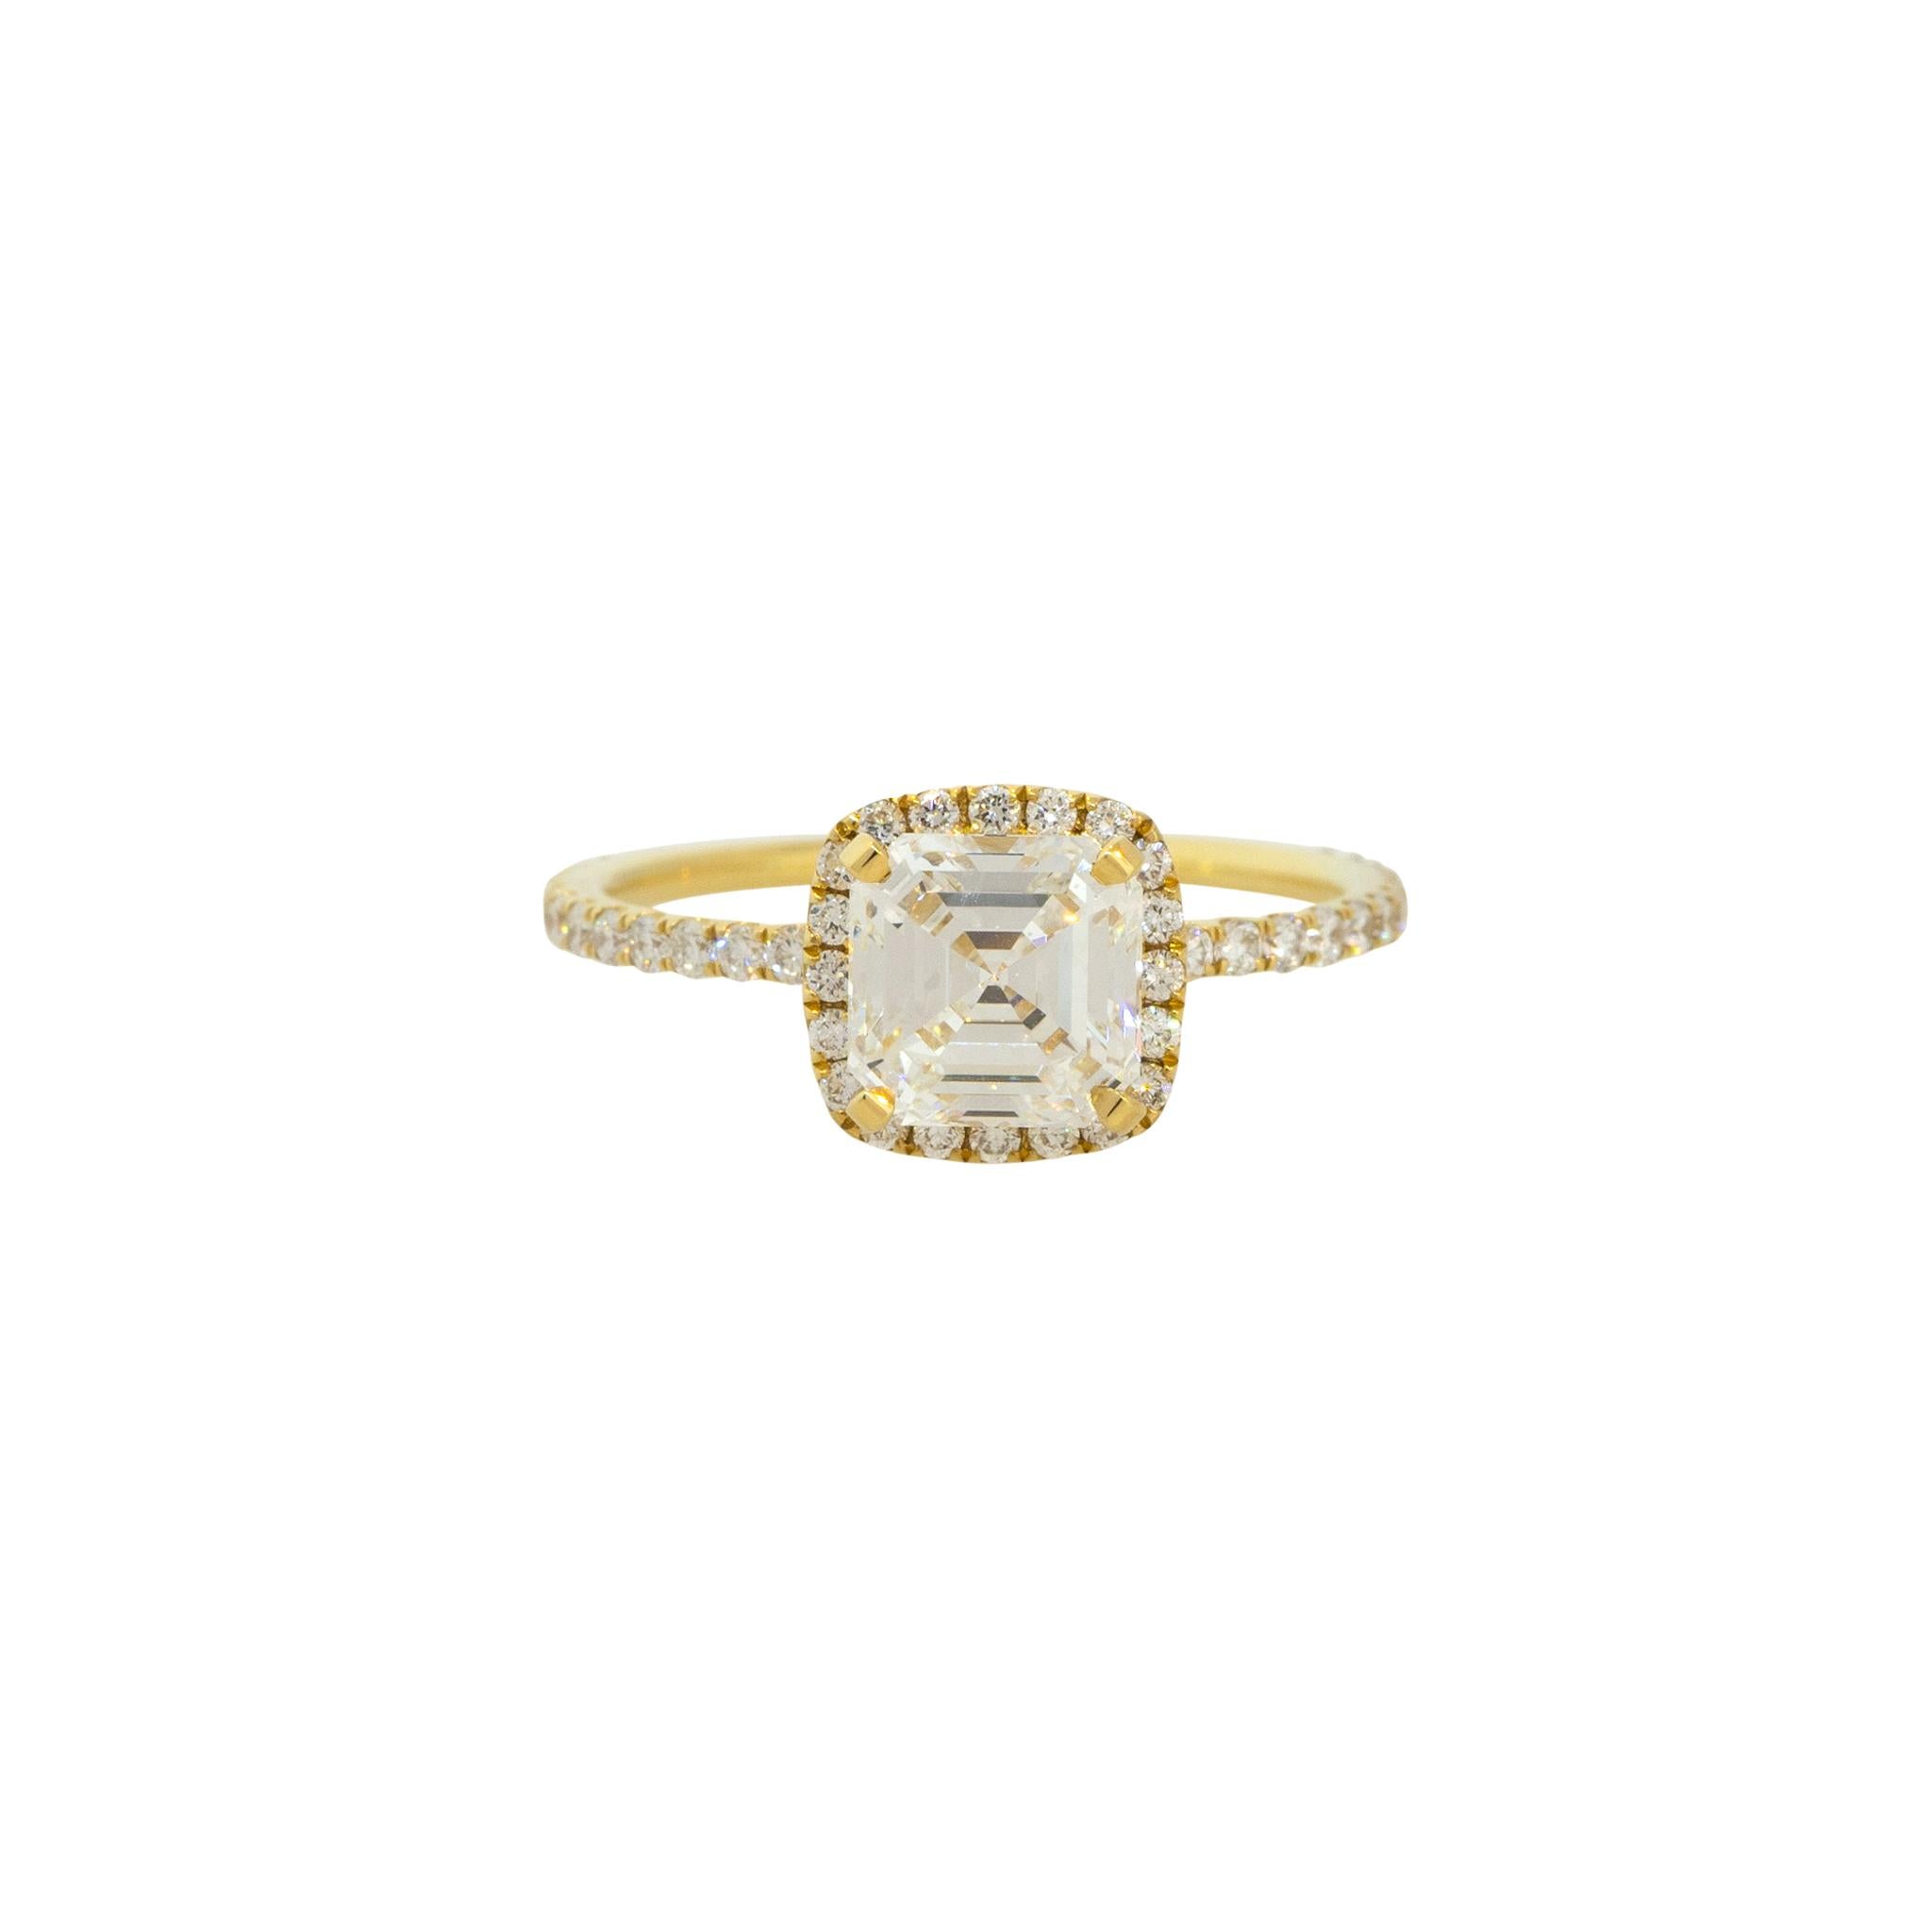 EGL Certified 18k Yellow Gold 2.01ctw Asscher Cut Diamond Engagement Ring

Raymond Lee Jewelers in Boca Raton -- South Florida’s destination for diamonds, fine jewelry, antique jewelry, estate pieces, and vintage jewels.

Style: Women's 4 Prong Halo